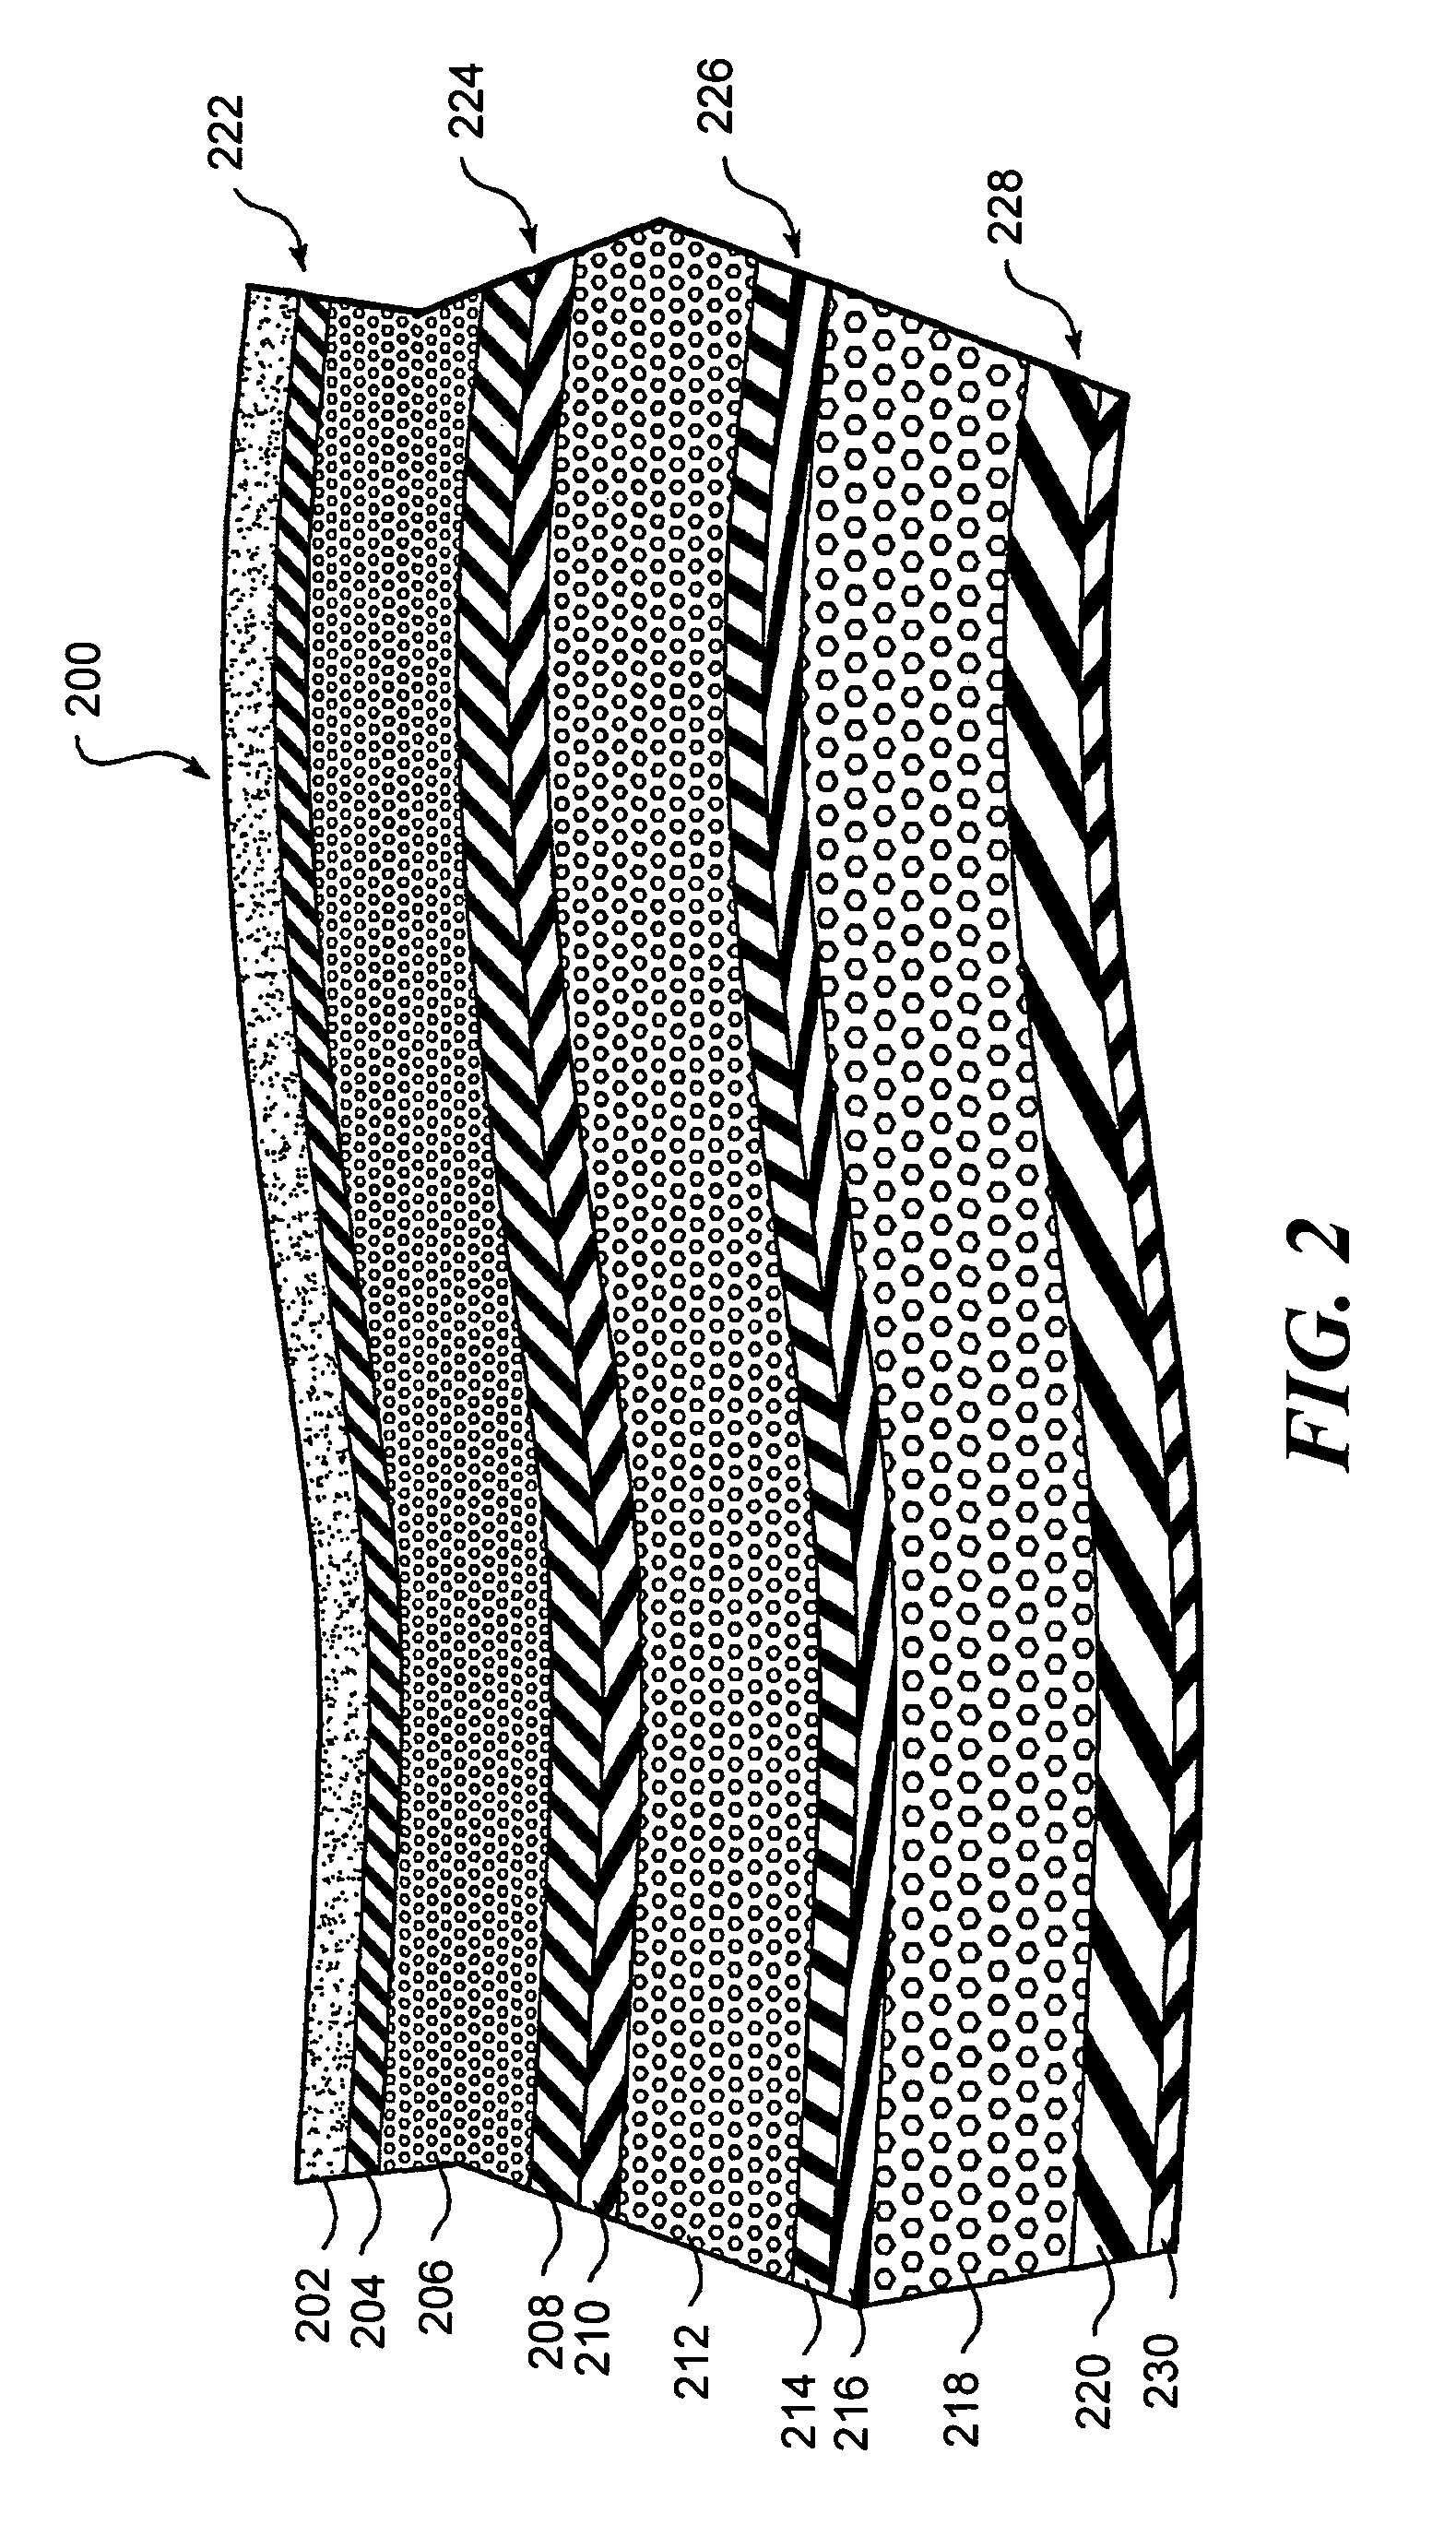 Medical physiological simulator including a conductive elastomer layer